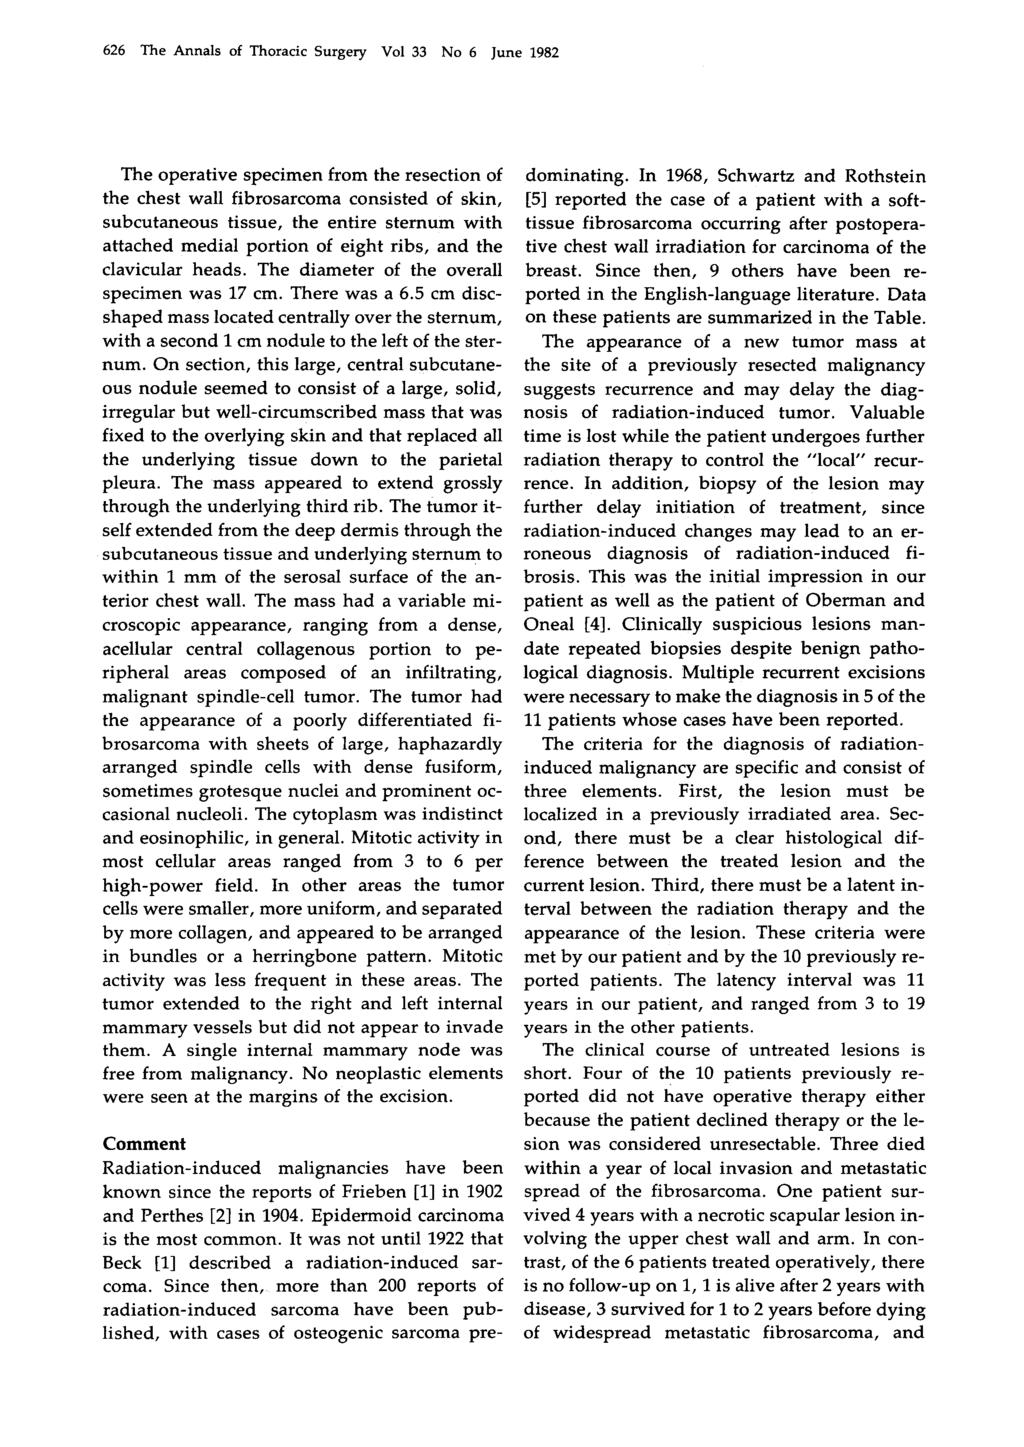 626 The Annals of Thoracic Surgery Vol 33 6 June 1982 The operative specimen from the resection of the chest wall fibrosarcoma consisted of skin, subcutaneous tissue, the entire sternum with attached